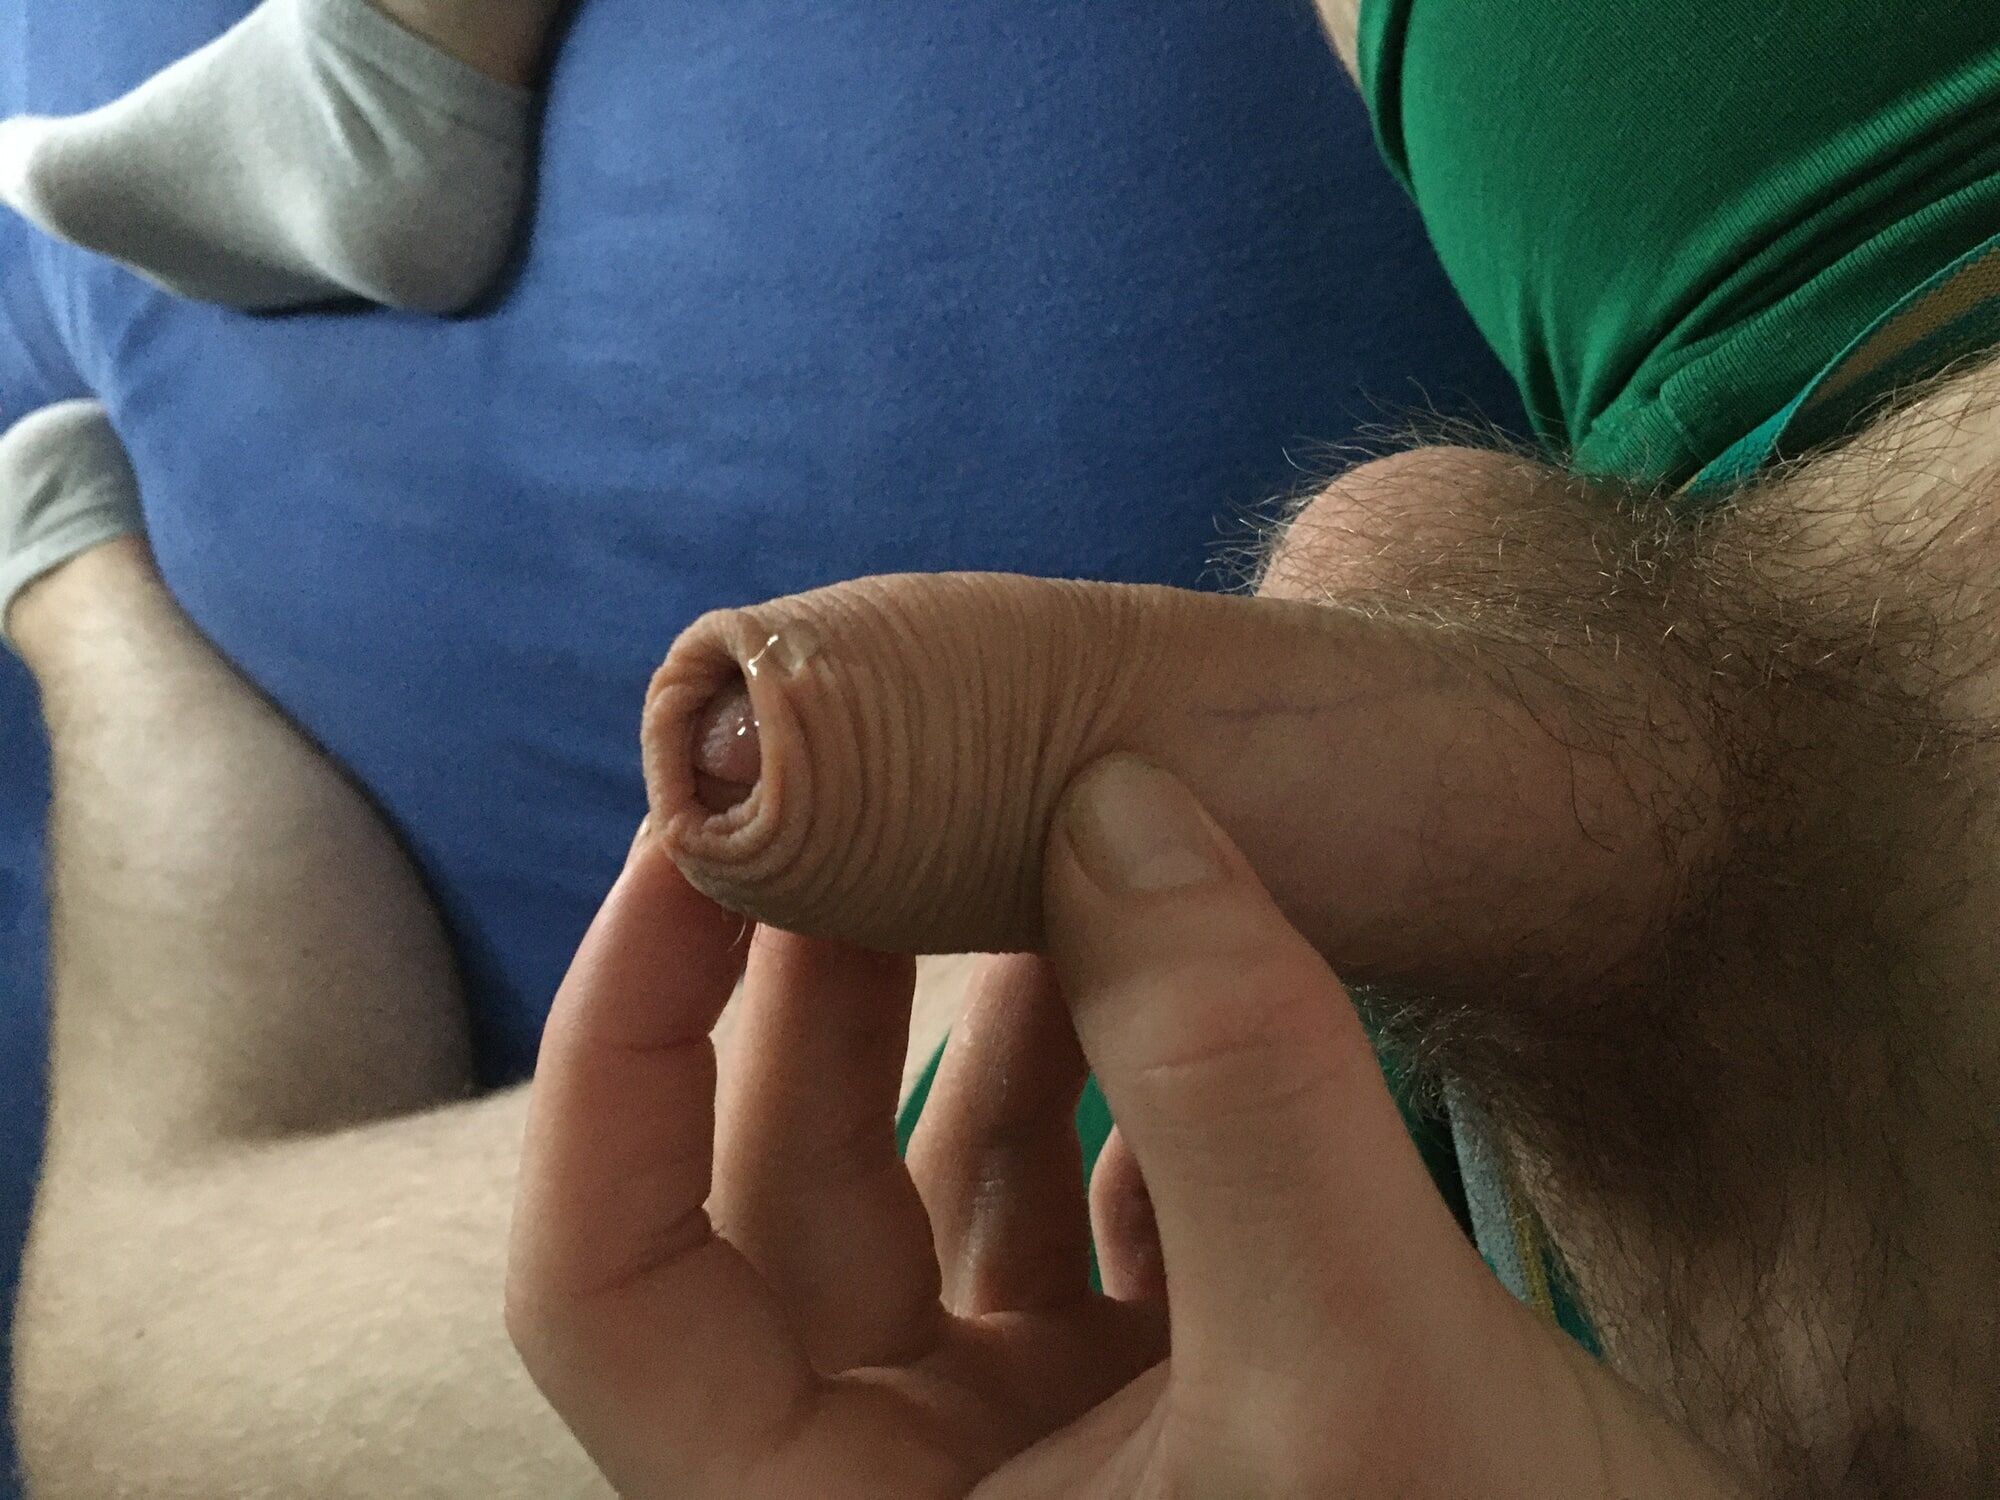 Hairy Dick And Balls Cockhead Foreskin Play With Pre- Cum #56